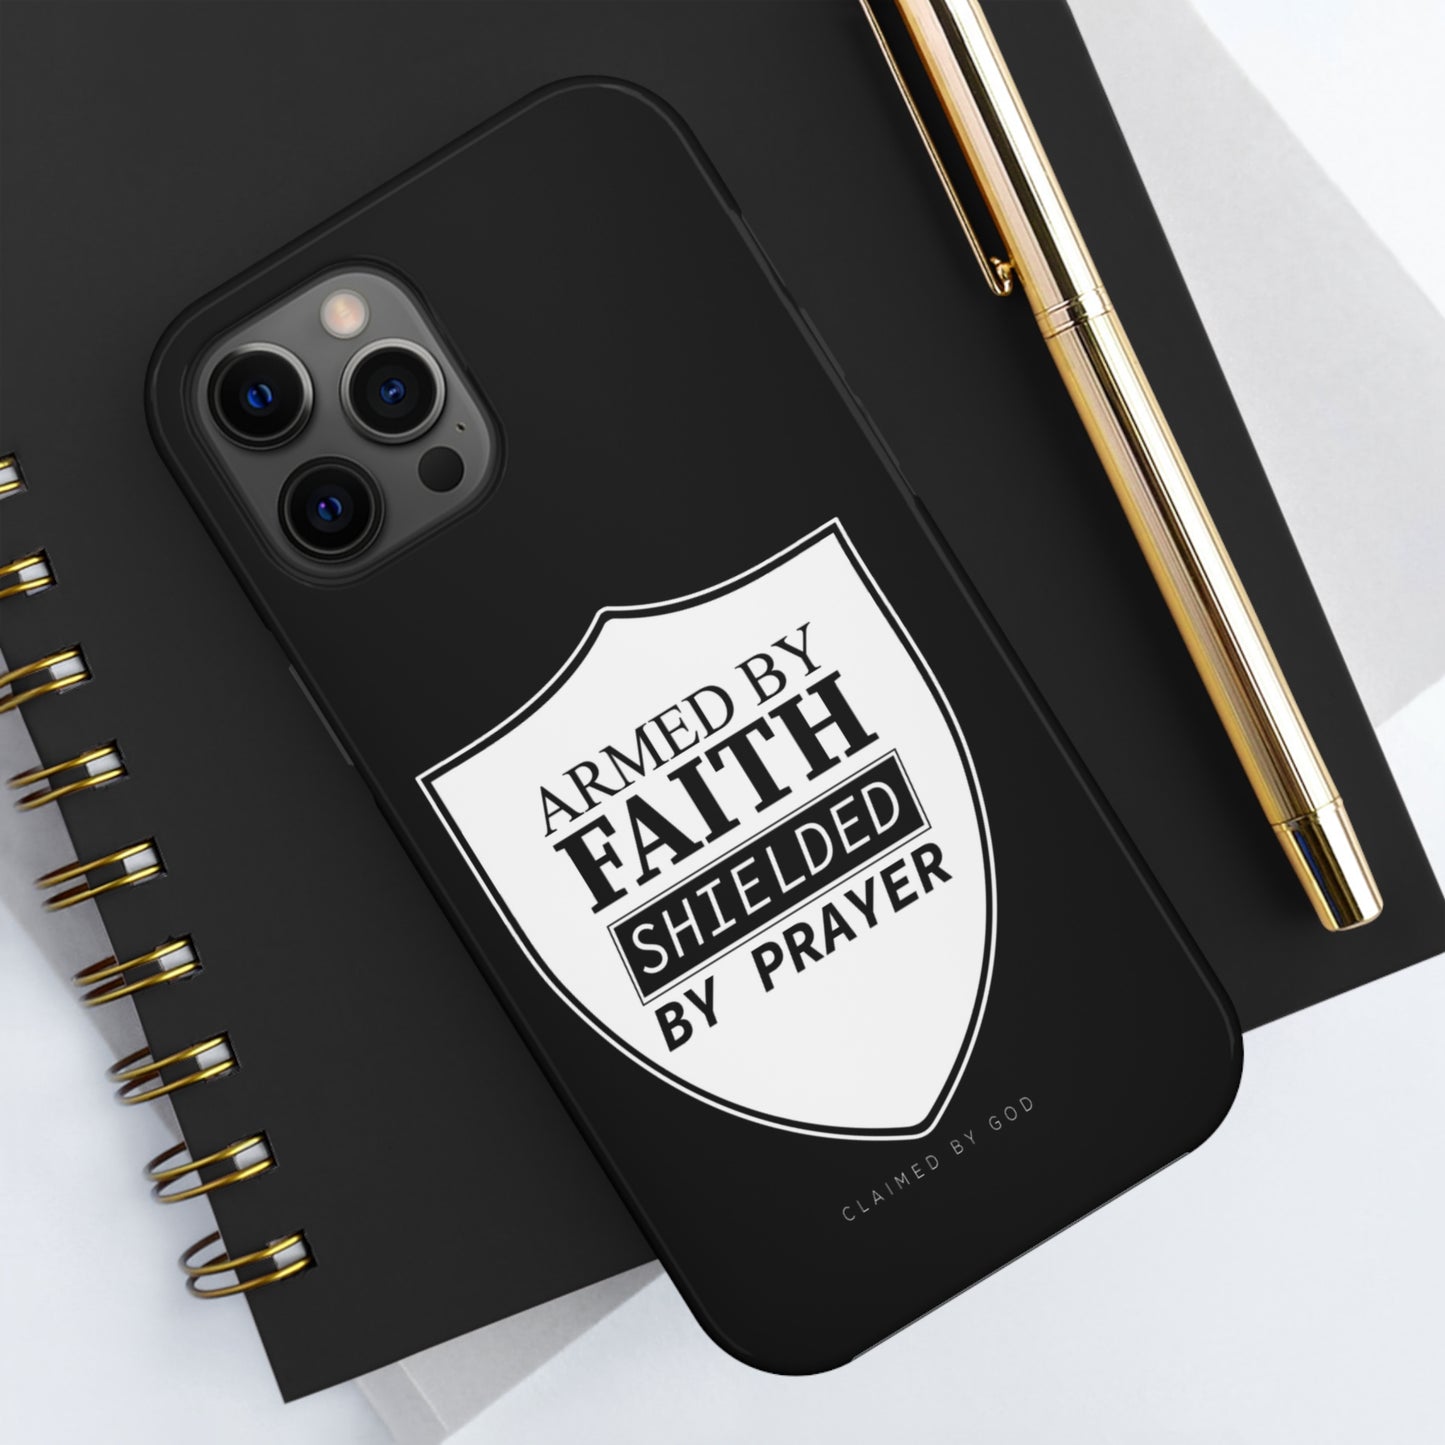 Armed By Faith Shielded By Prayer Tough Phone Cases, Case-Mate